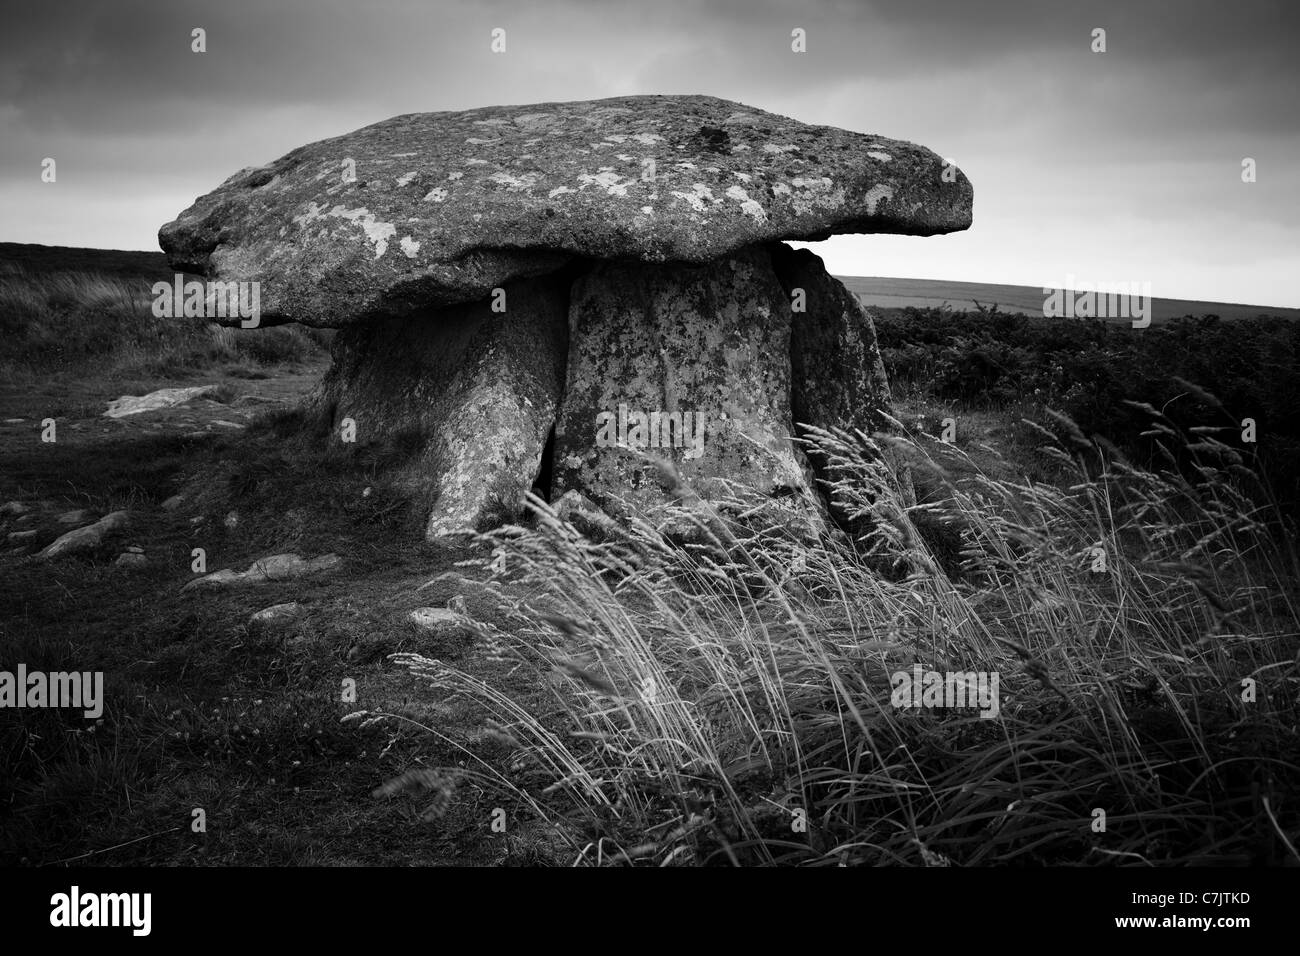 Dry grasses blow in the wind in front of Chun Quoit burial chamber near Morvah, Cornwall Stock Photo